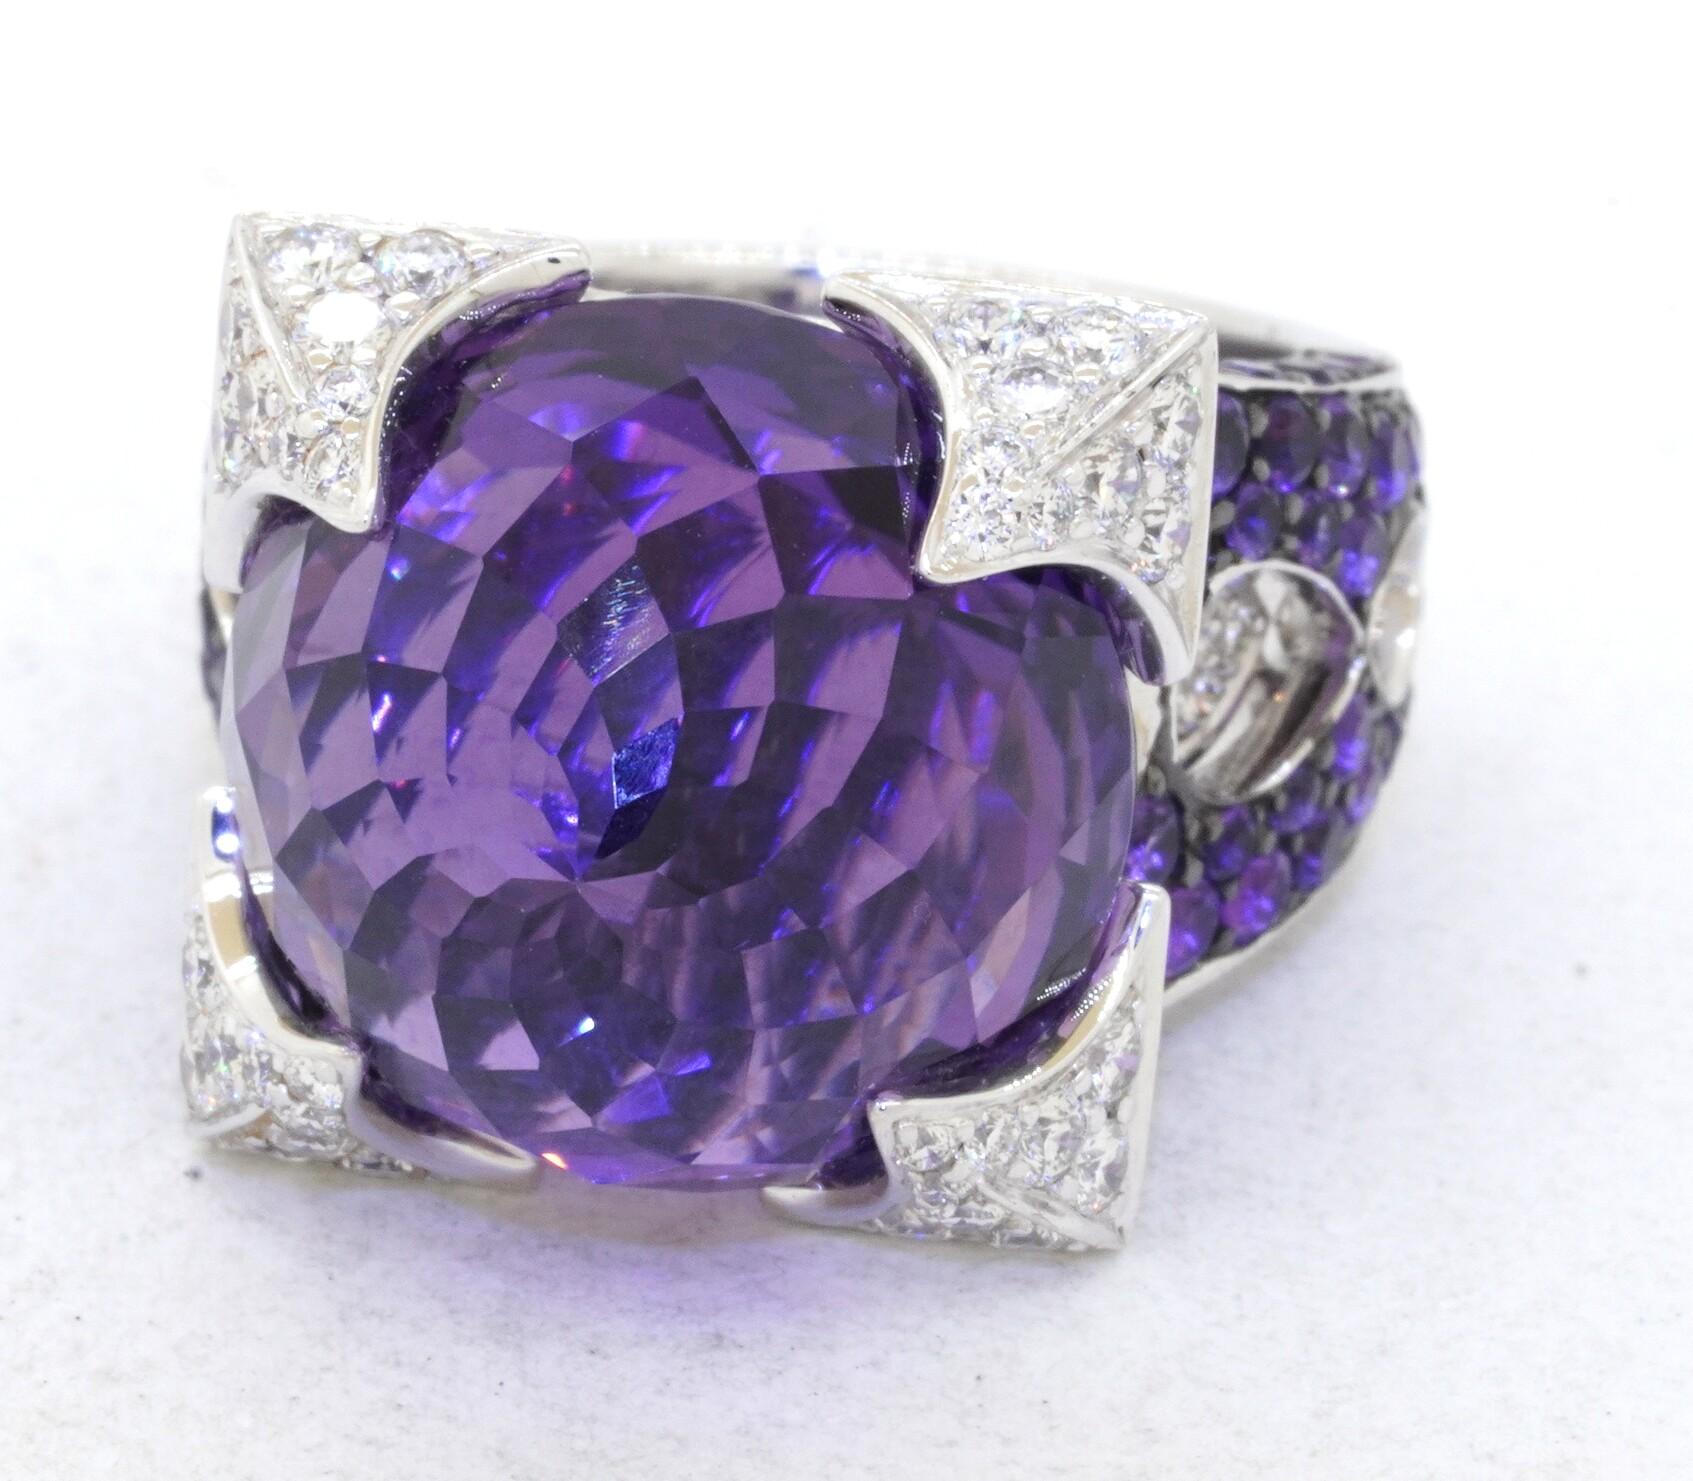 Rodney Rayner 18k white gold 35.40ct amethyst and diamond dragon ring size 6.75. This sensational ring is made from solid 18k white gold and features both diamond and amethyst gemstones. The center stone of the ring is a huge 30ct vortex cut